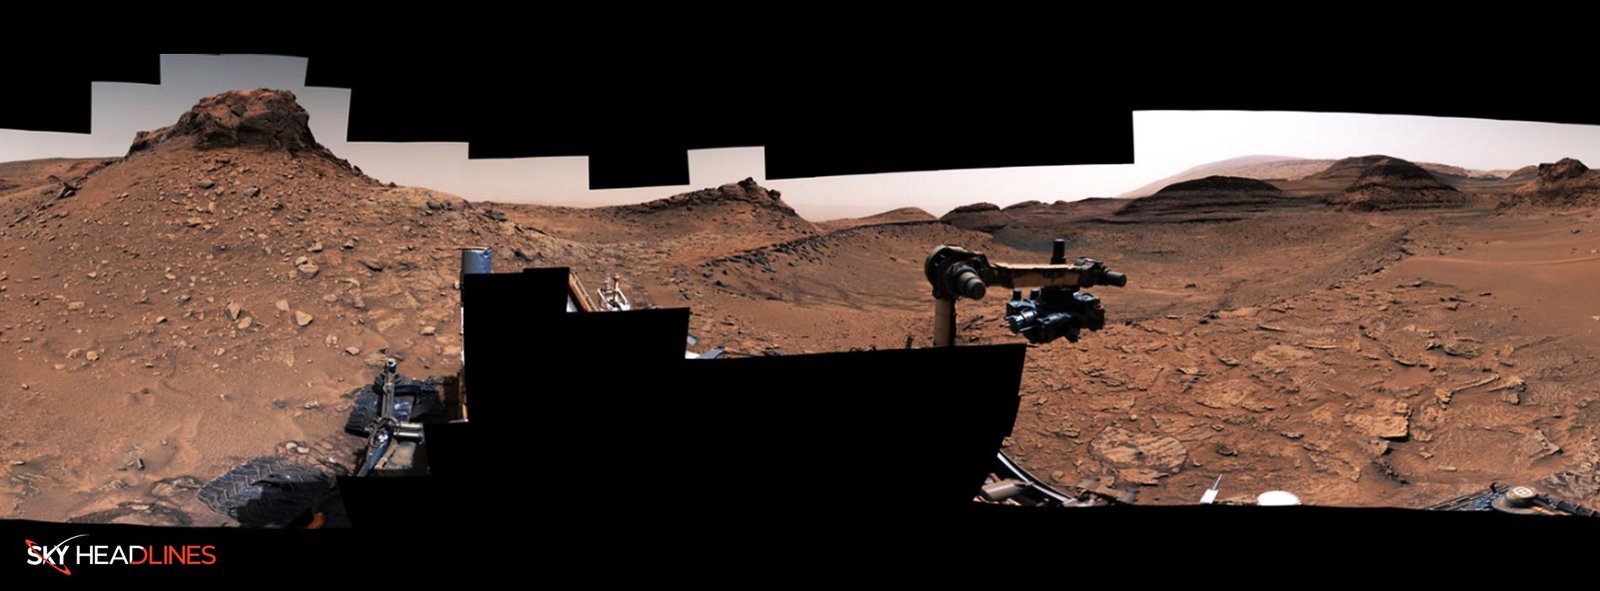 Curiosity Rover finds Mars' watery past clues